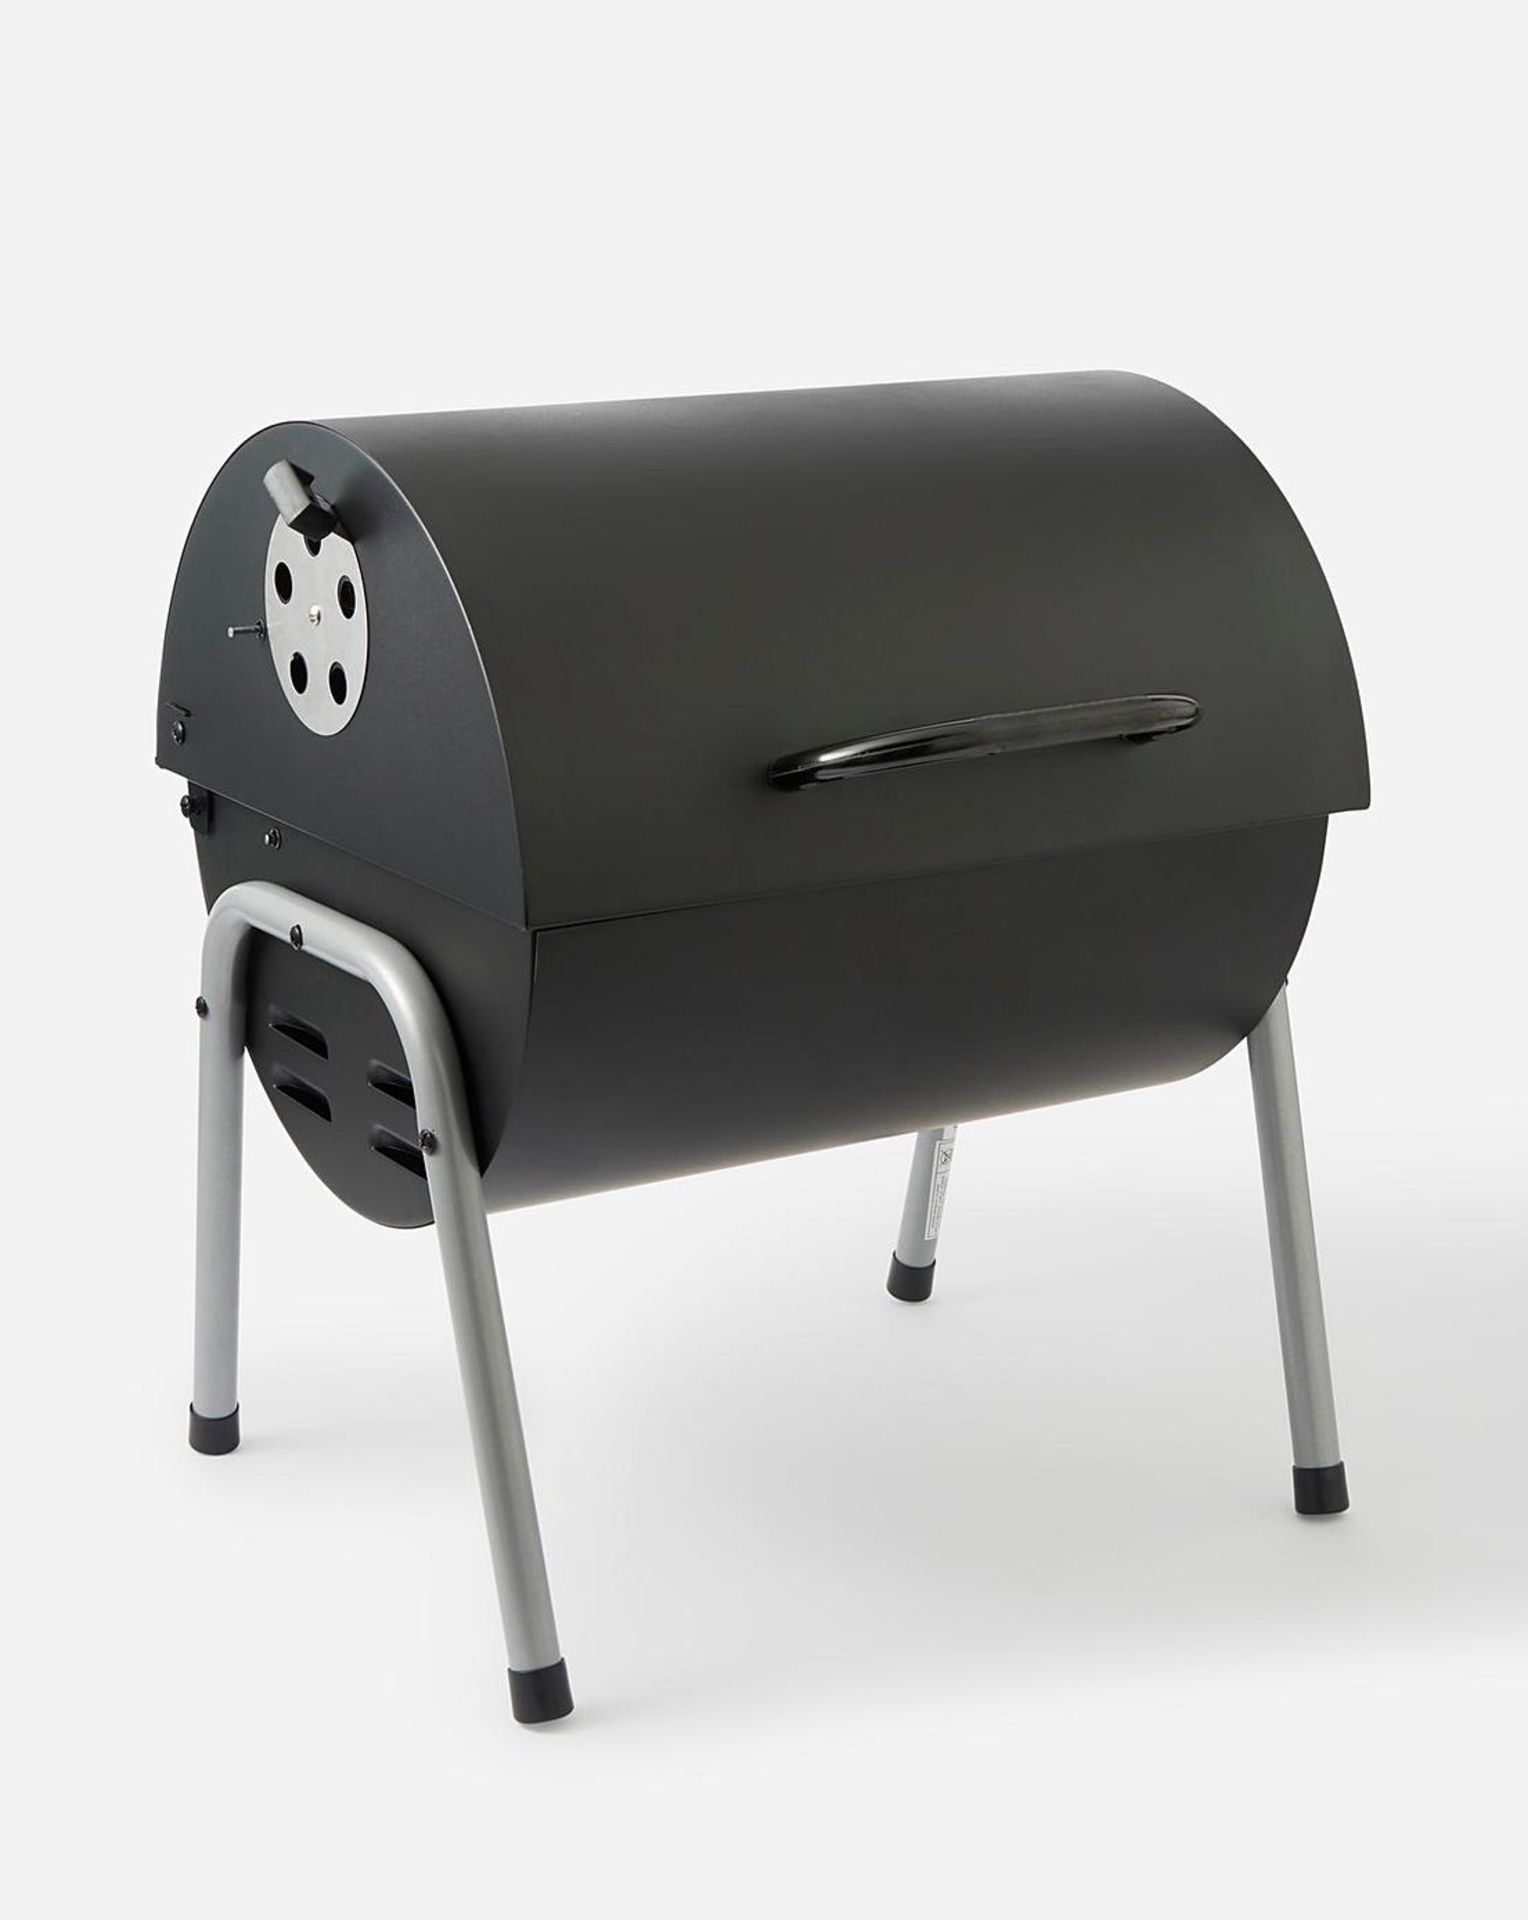 BRAND NEW CHARCOAL OIL DRUM BBQ R15-5 - Image 3 of 4